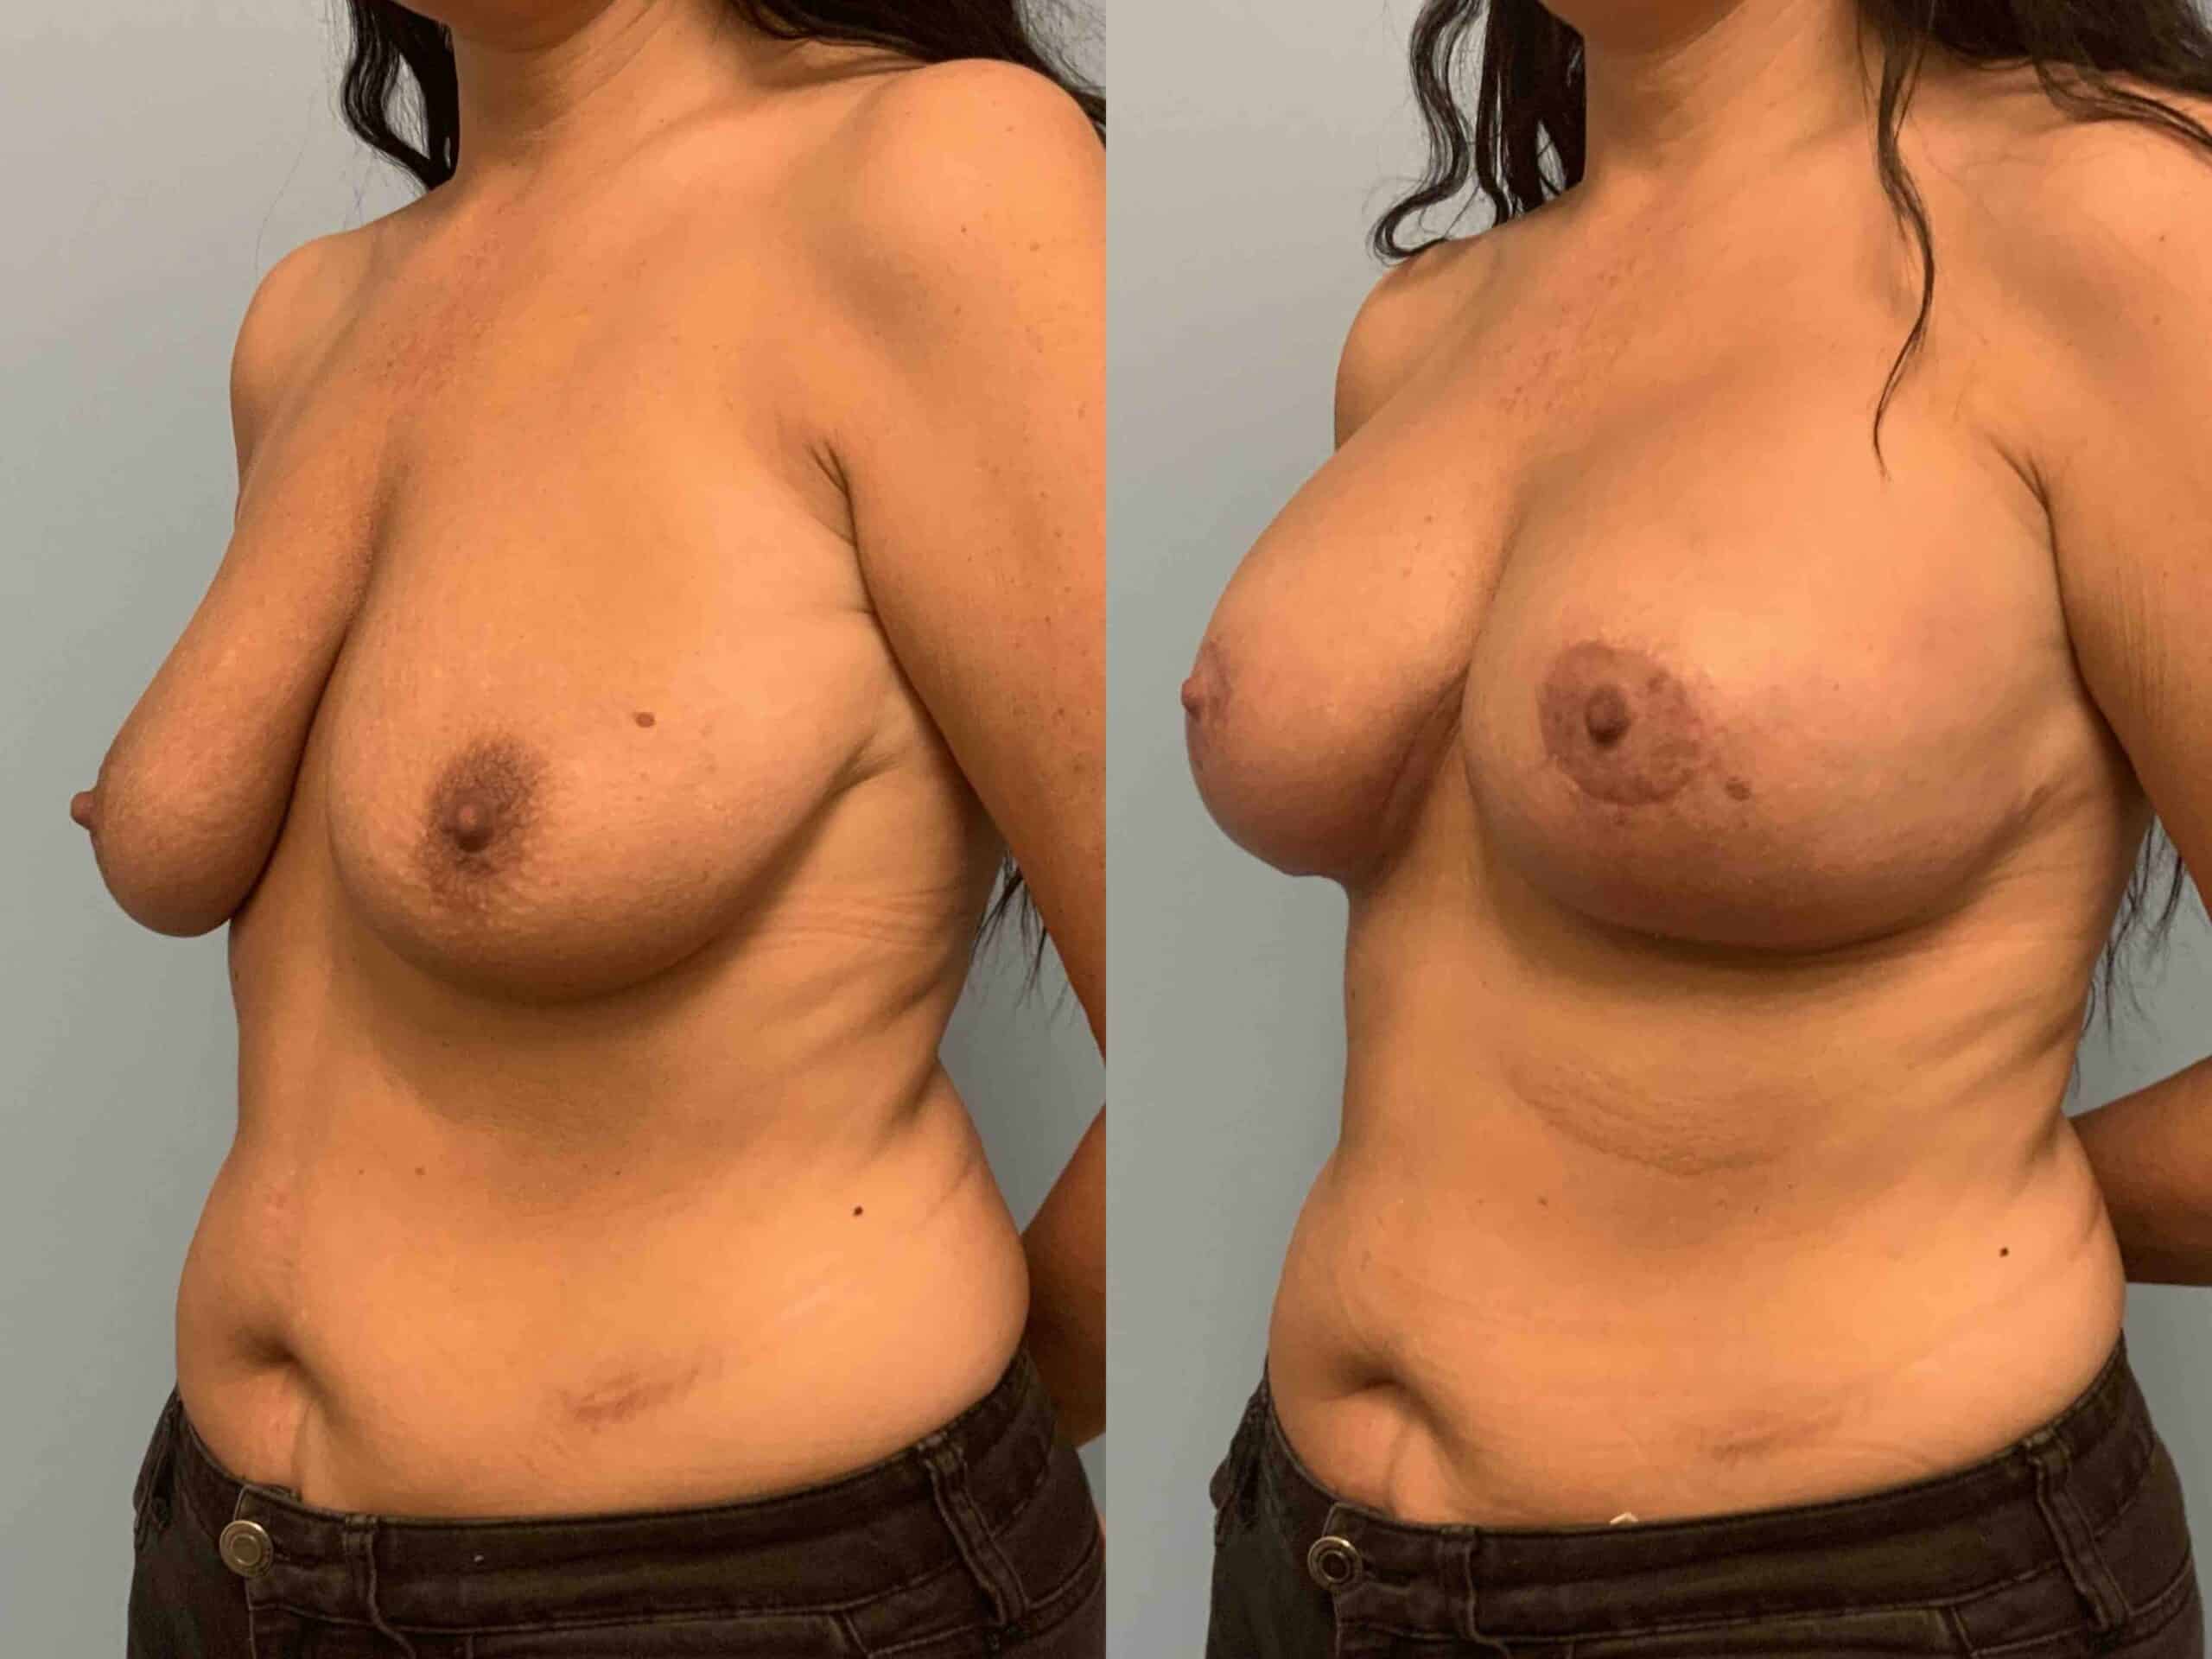 Before and after, 1 mo post op from Breast Lift/Mastopexy, Breast Augmentation, Axillary Roll Resection (diagonal view)